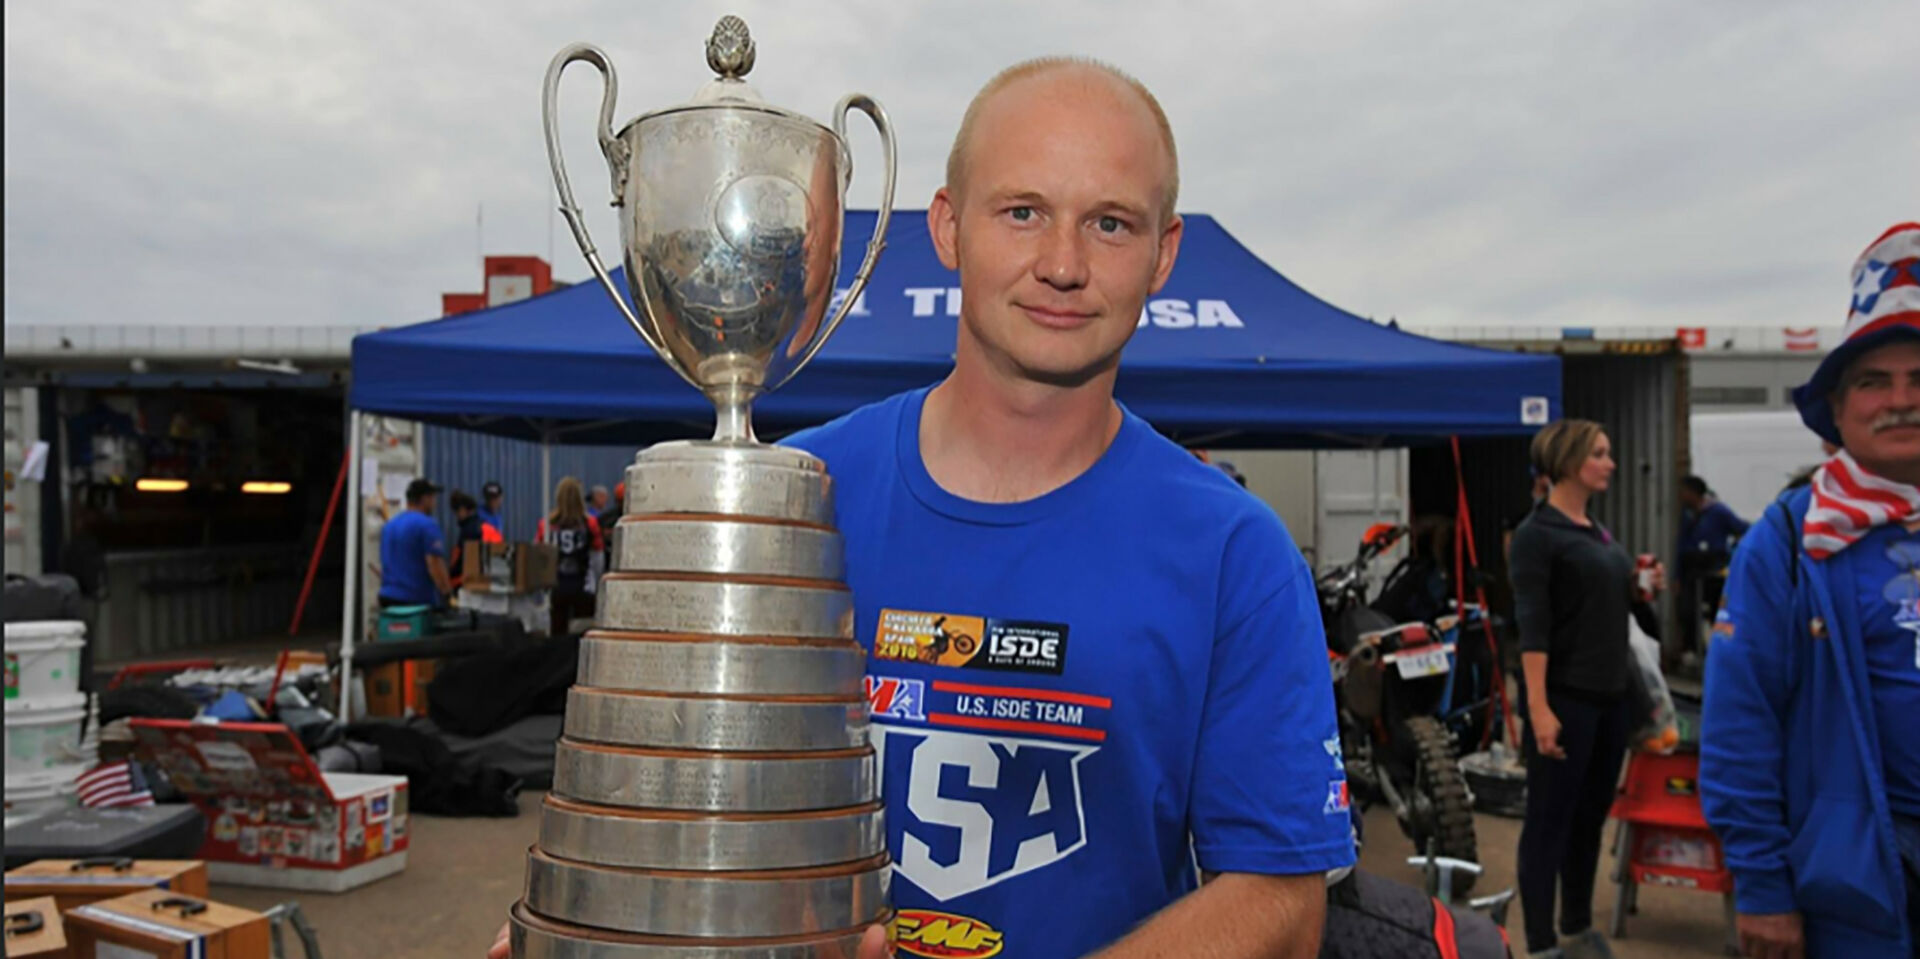 AMA's new Off-Road Racing Manager Michael Jolly. Photo courtesy AMA.